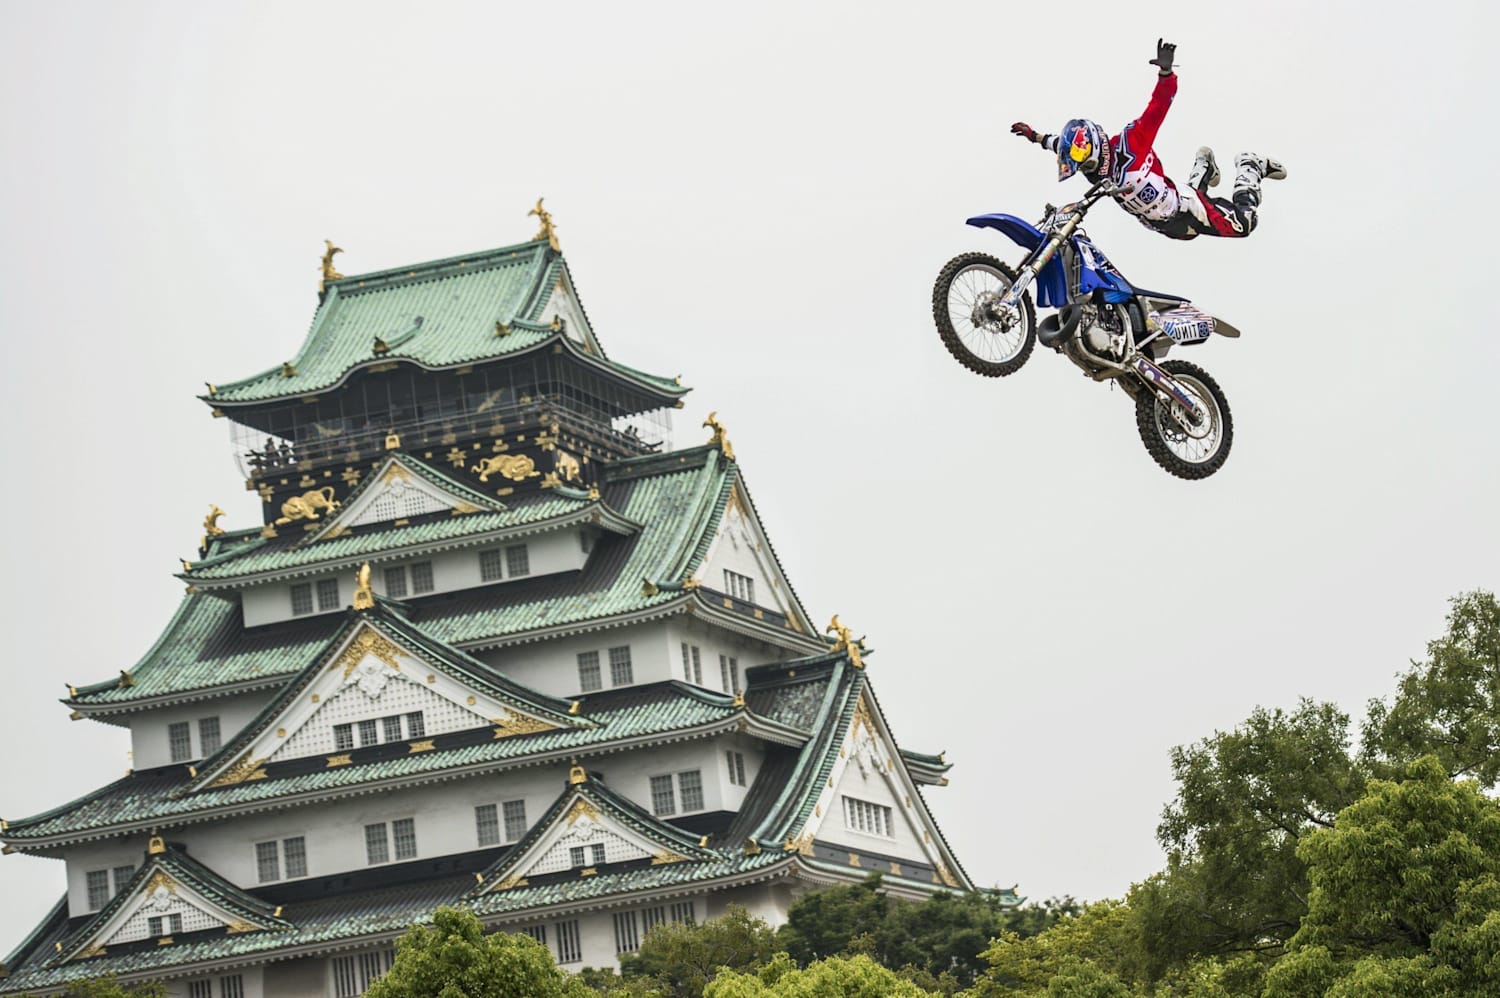 Red Bull X-Fighters Osakaを120%楽しむ方法まとめ